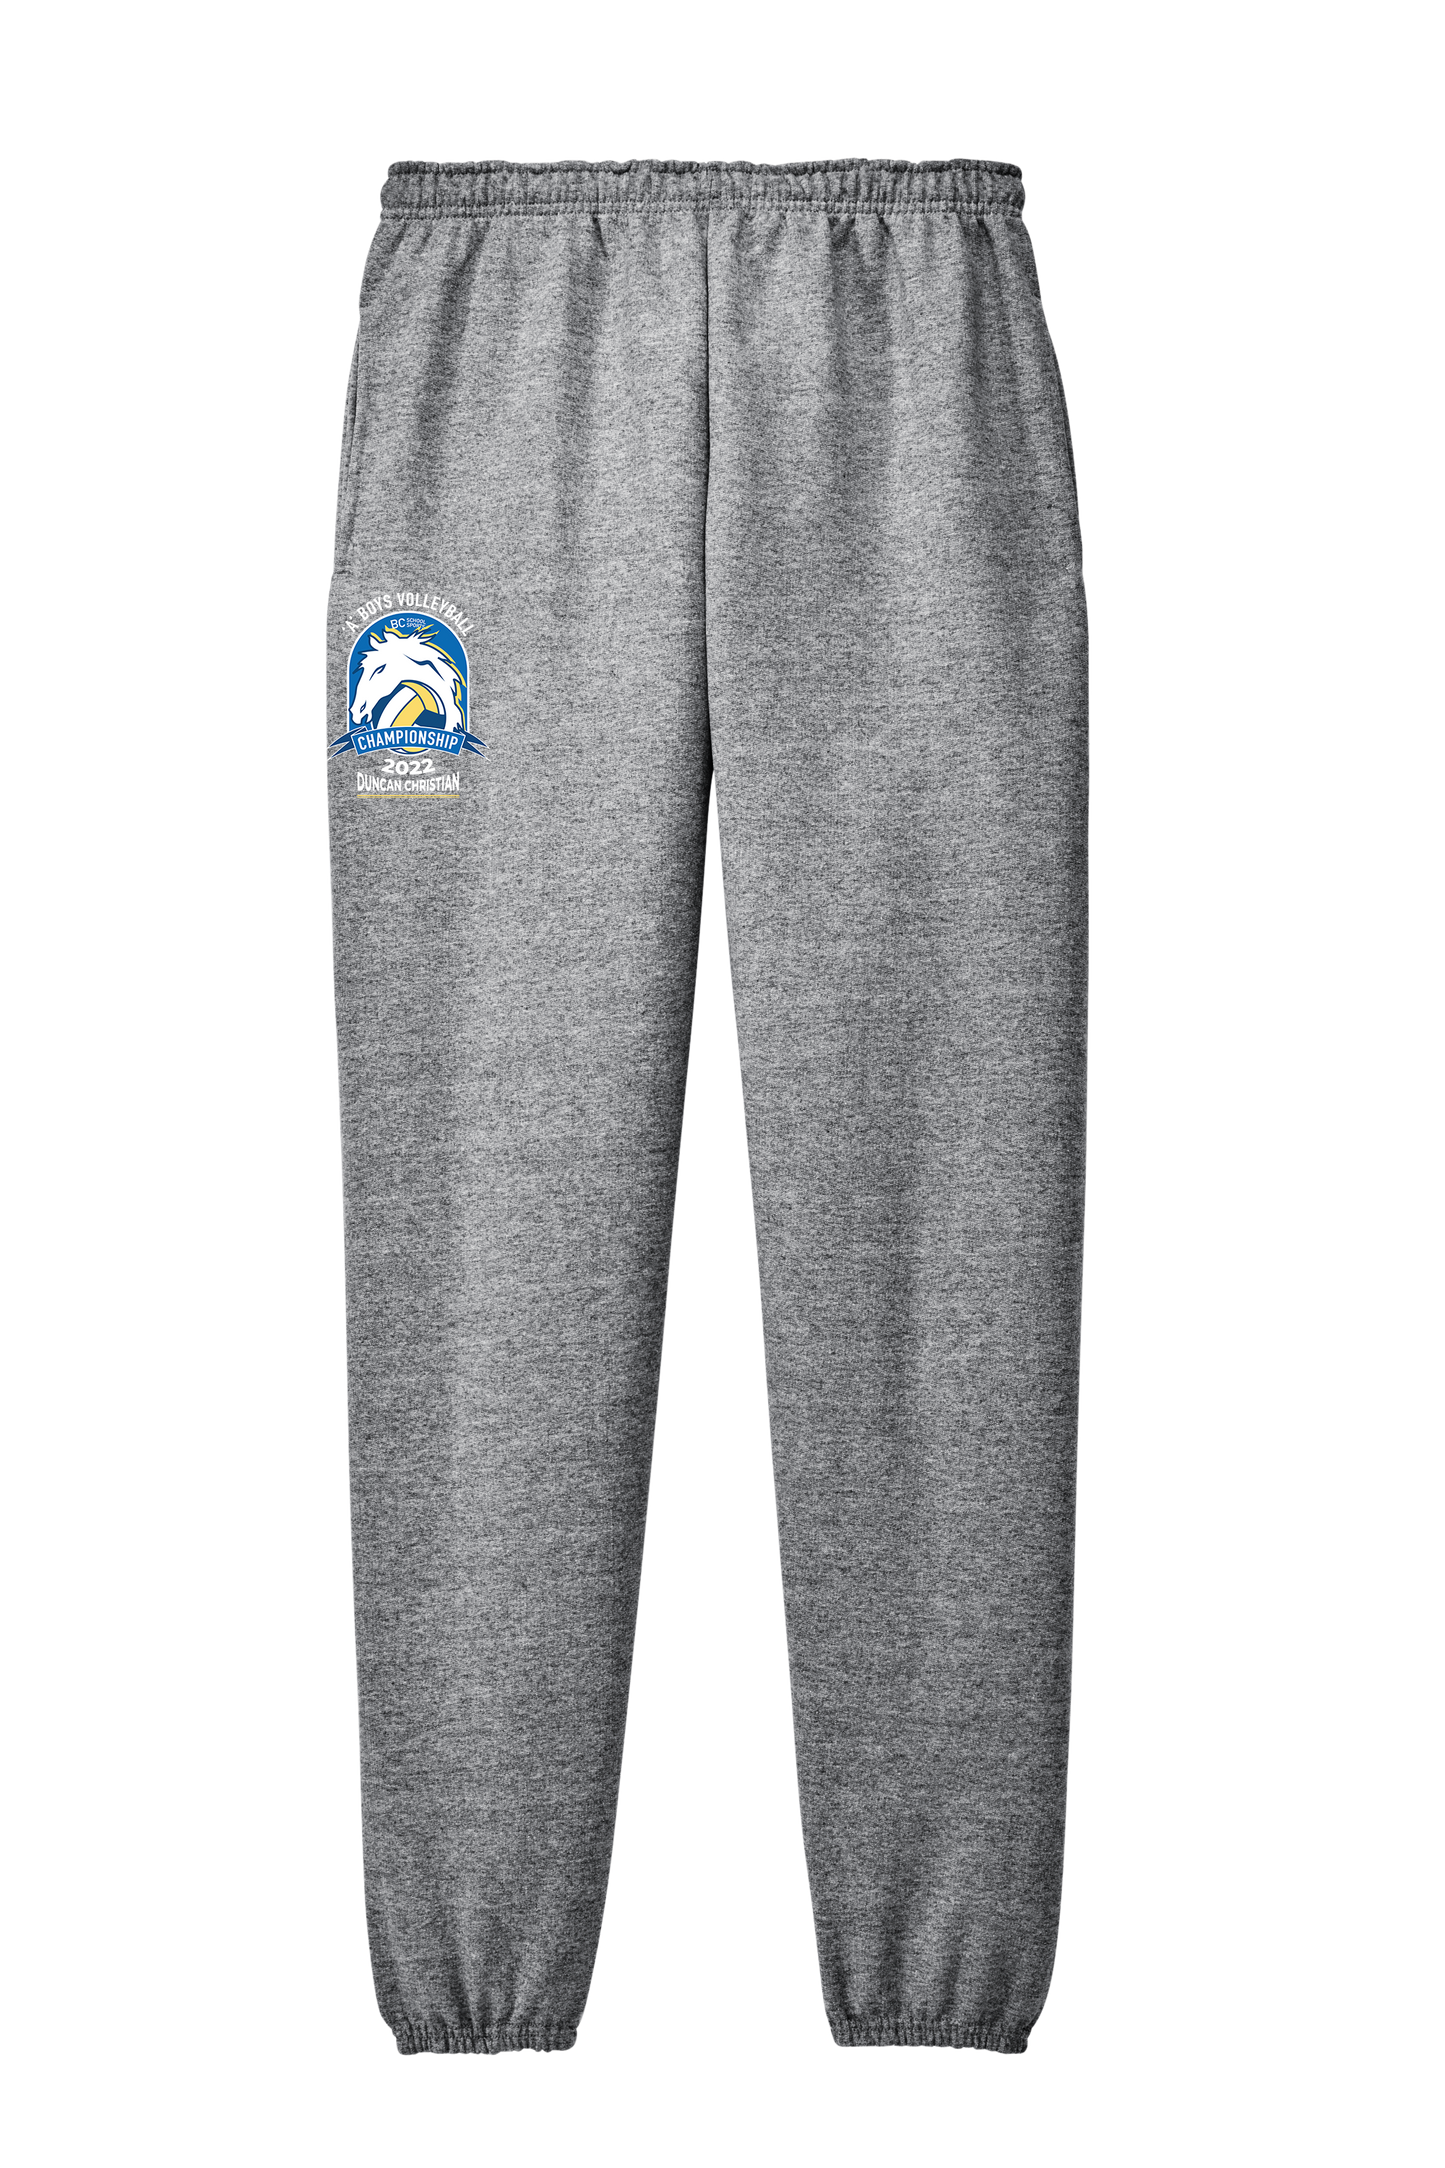 'A' Boys Volleyball Sweats - Athletic Heather